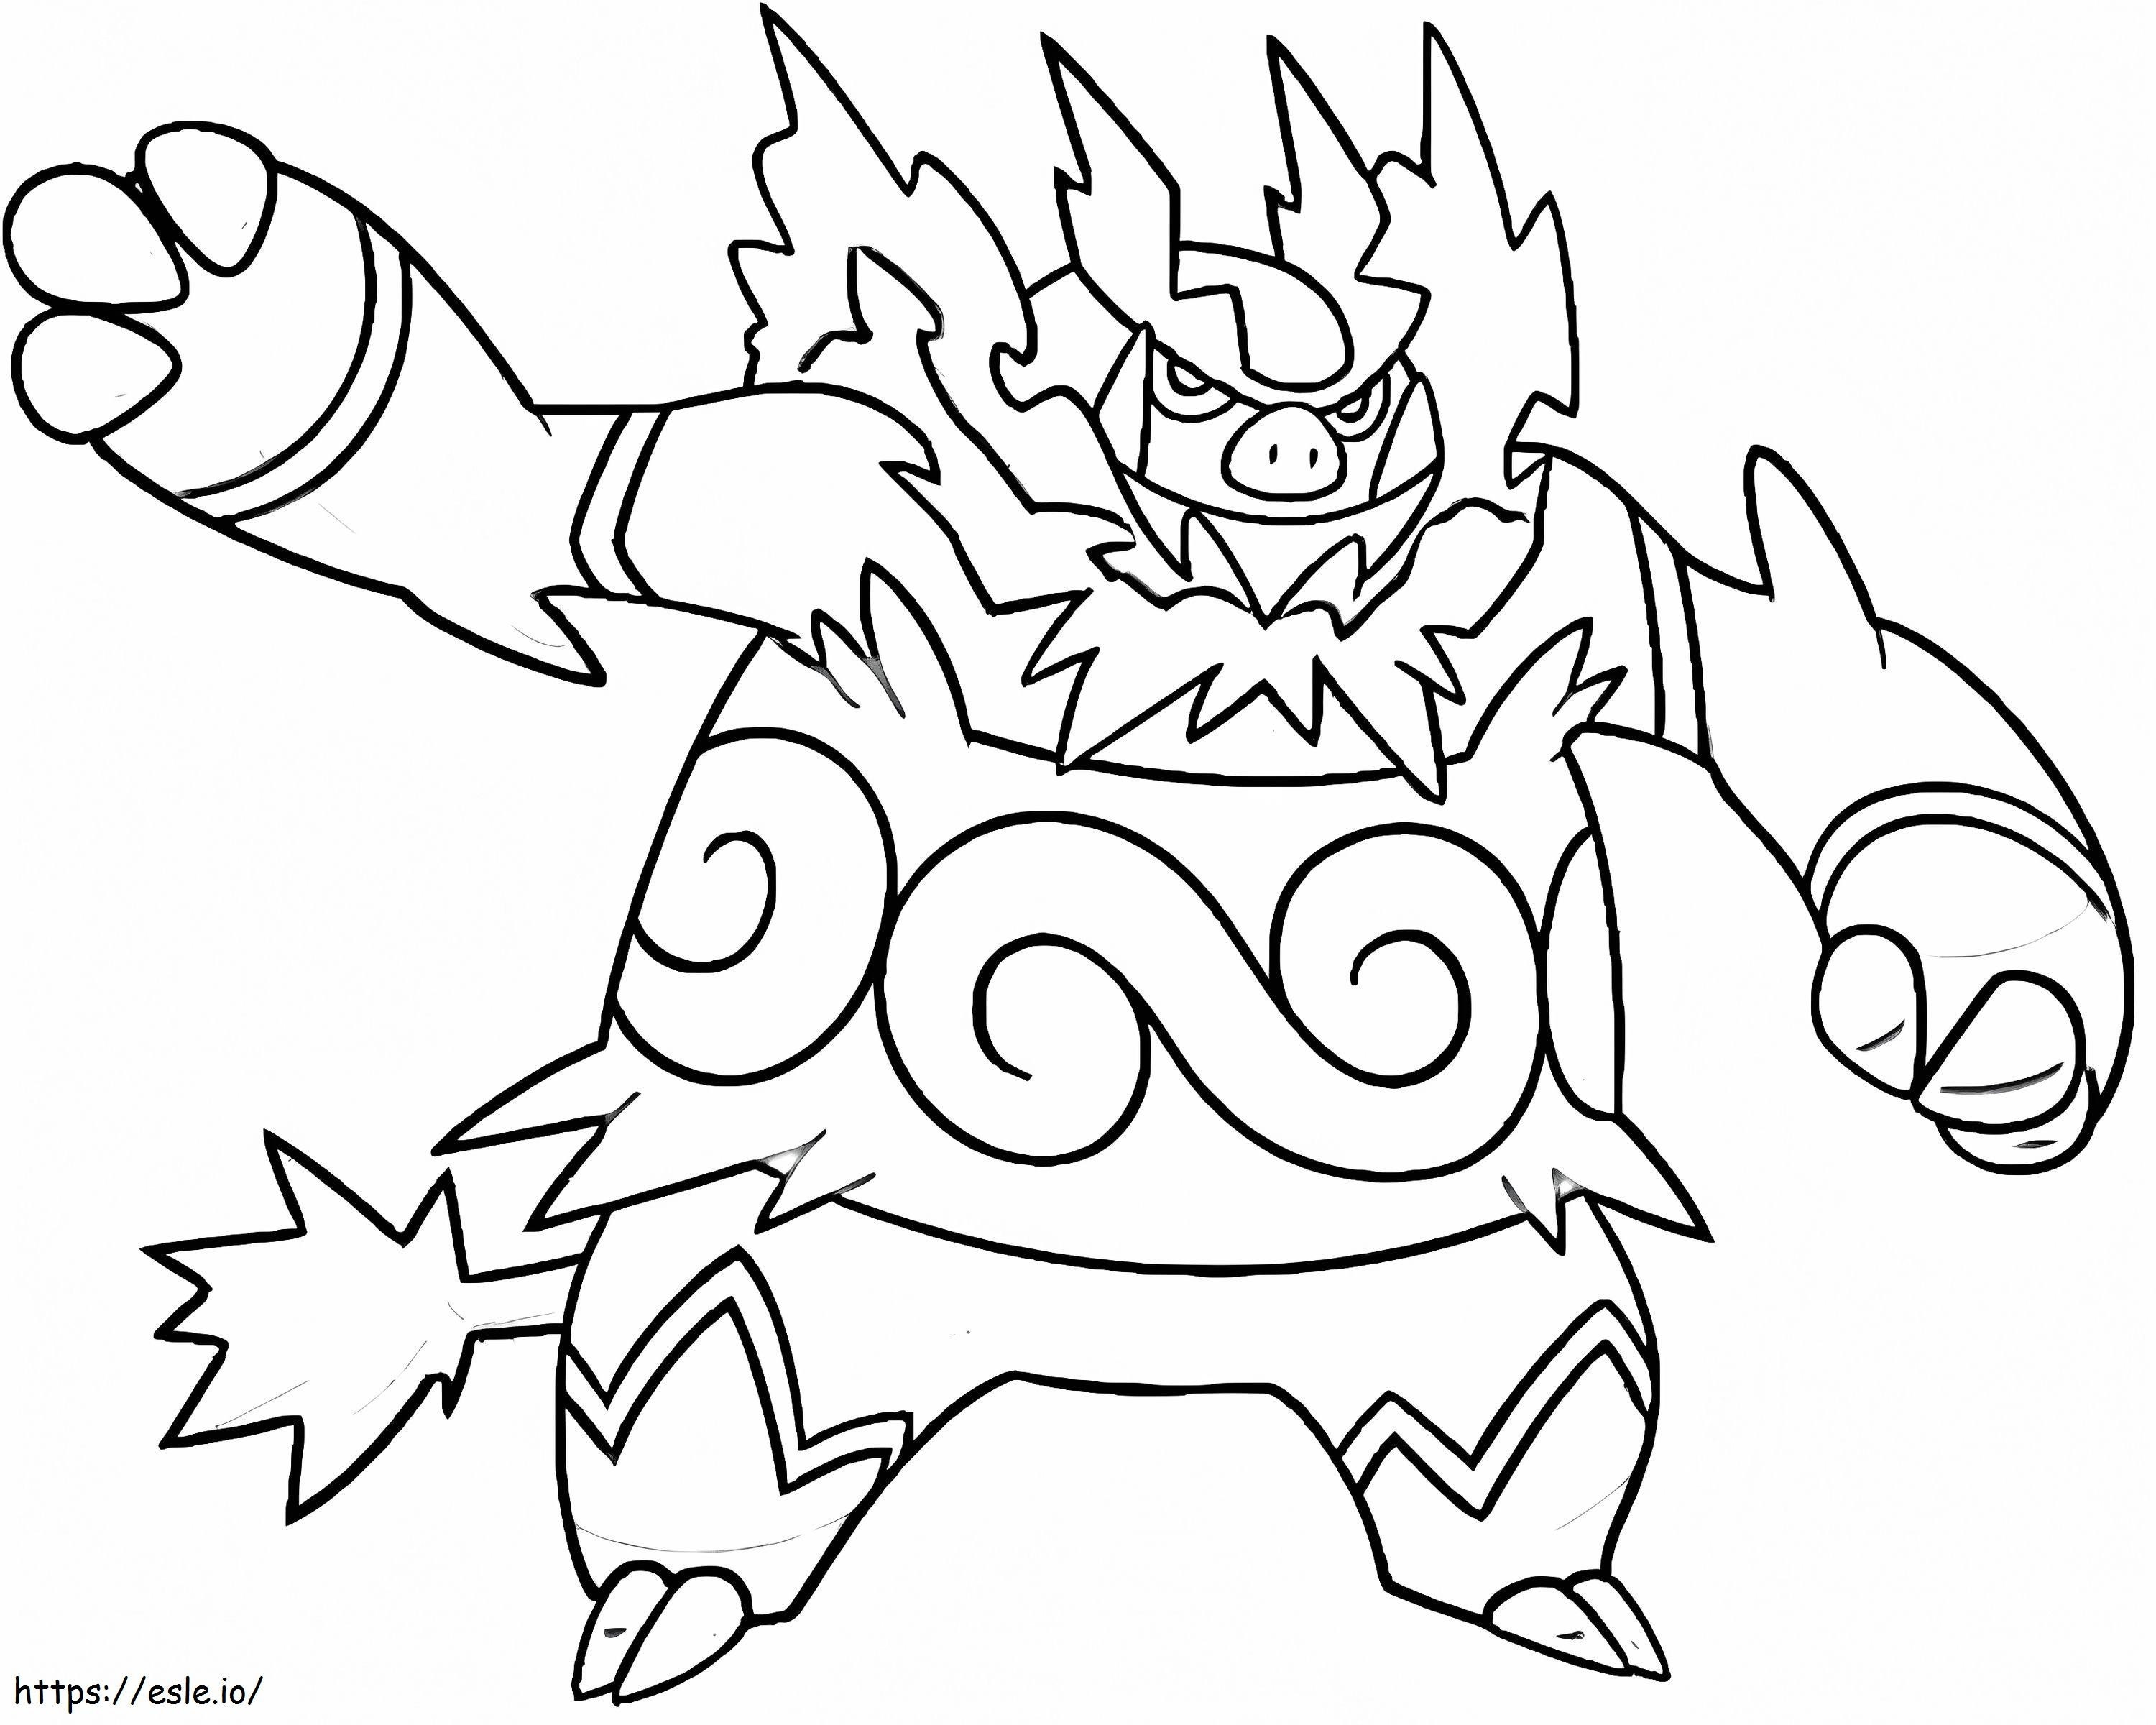 Plaster 2 coloring page